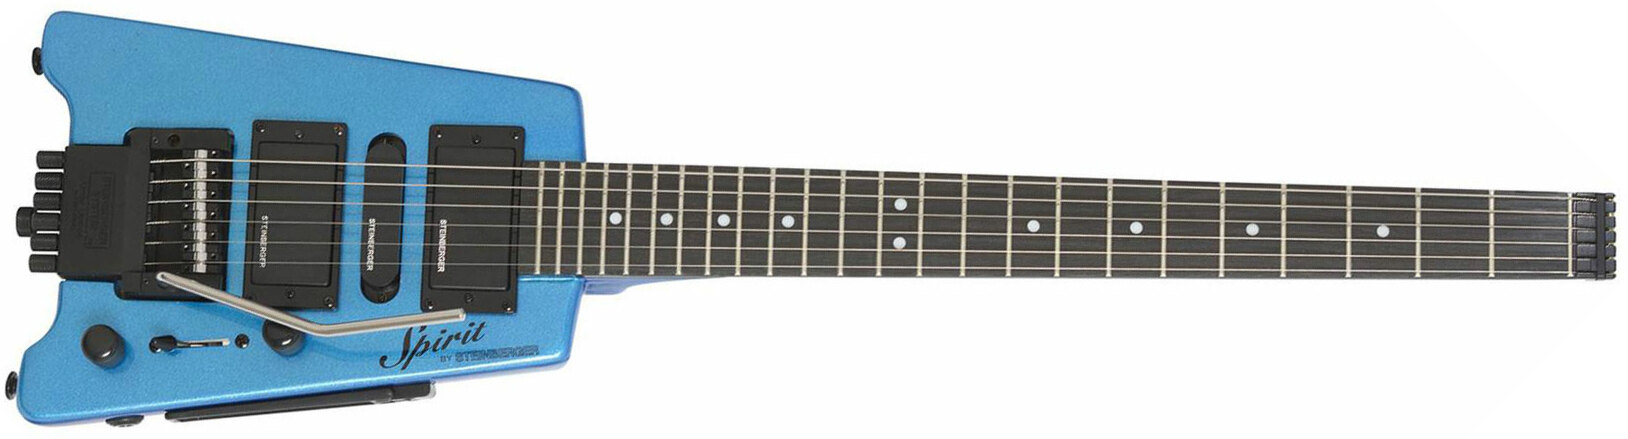 Steinberger Gt-pro Deluxe Outfit Hsh Trem Rw +housse - Frost Blue - Elektrische Reisegitarre - Main picture